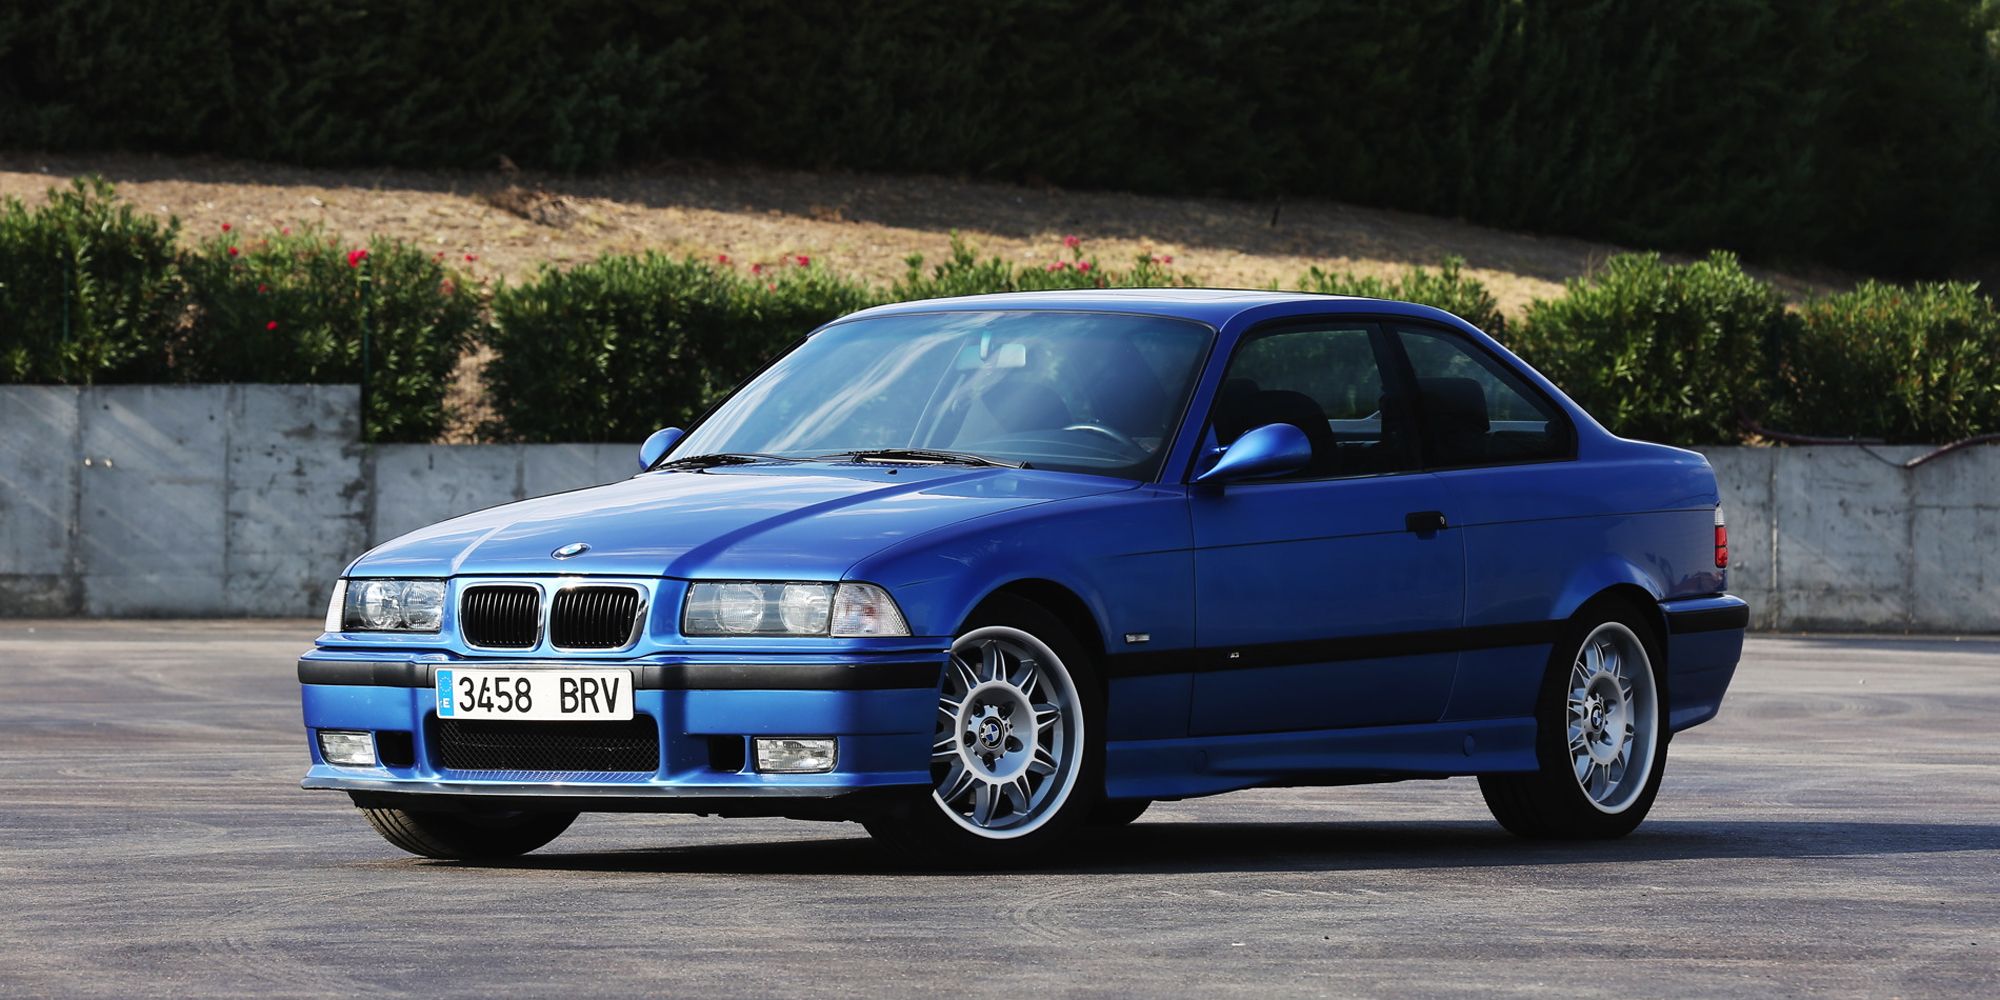 The front of the E36 M3